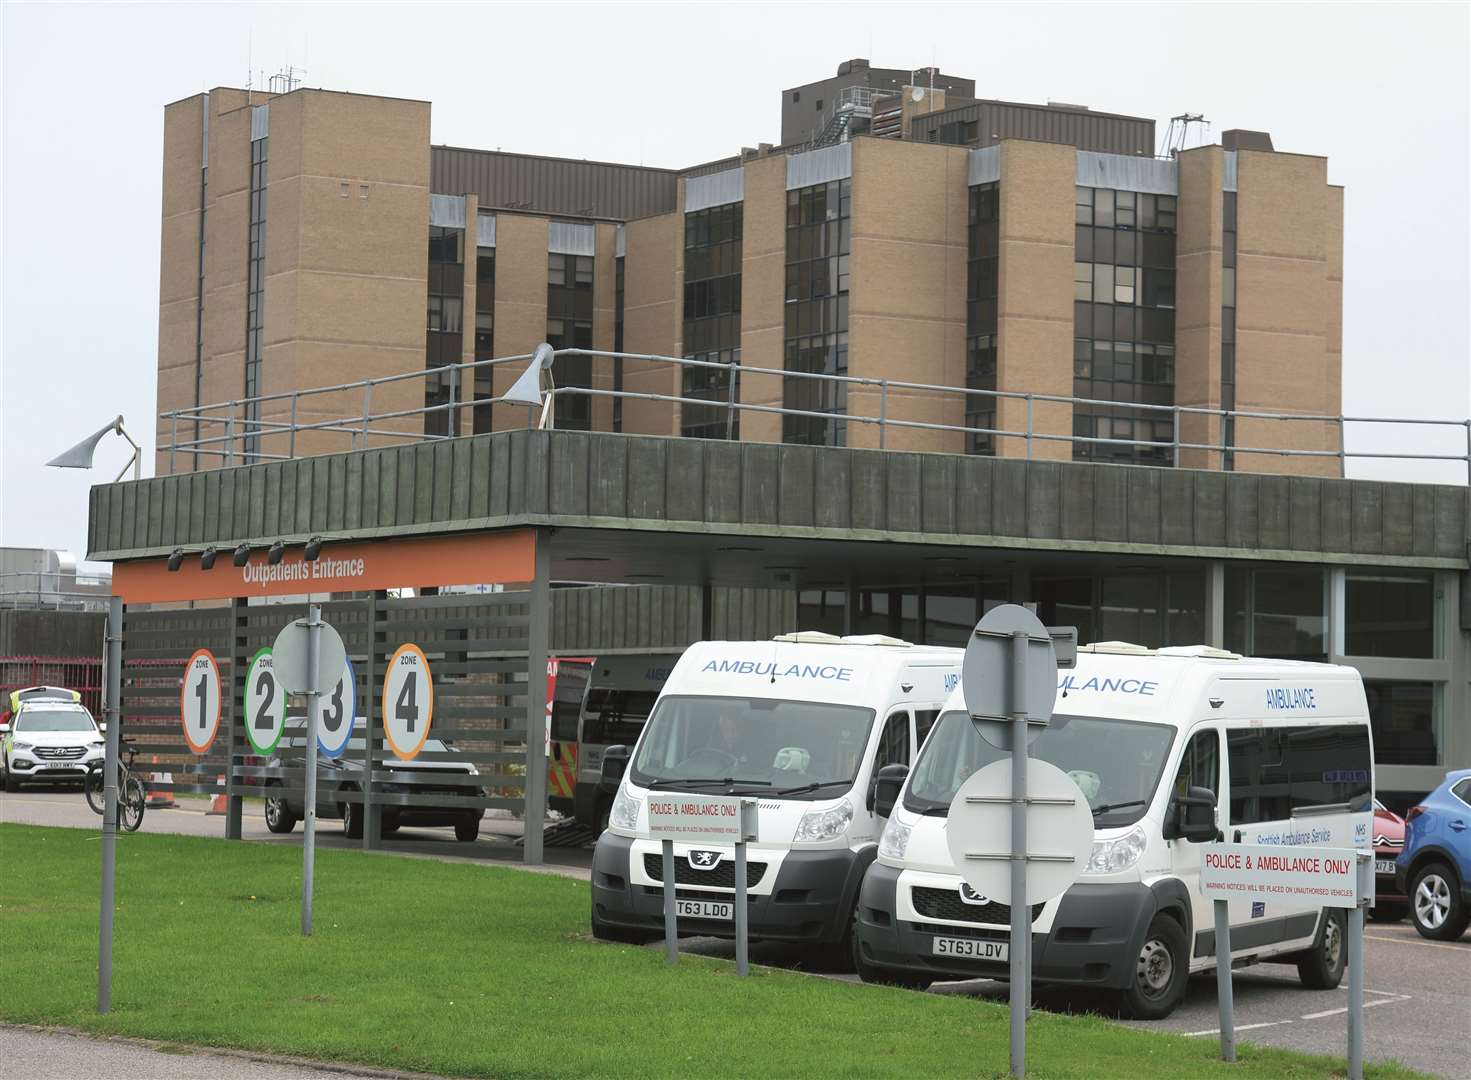 One patient was more than happy with the service at Raigmore Hospital.